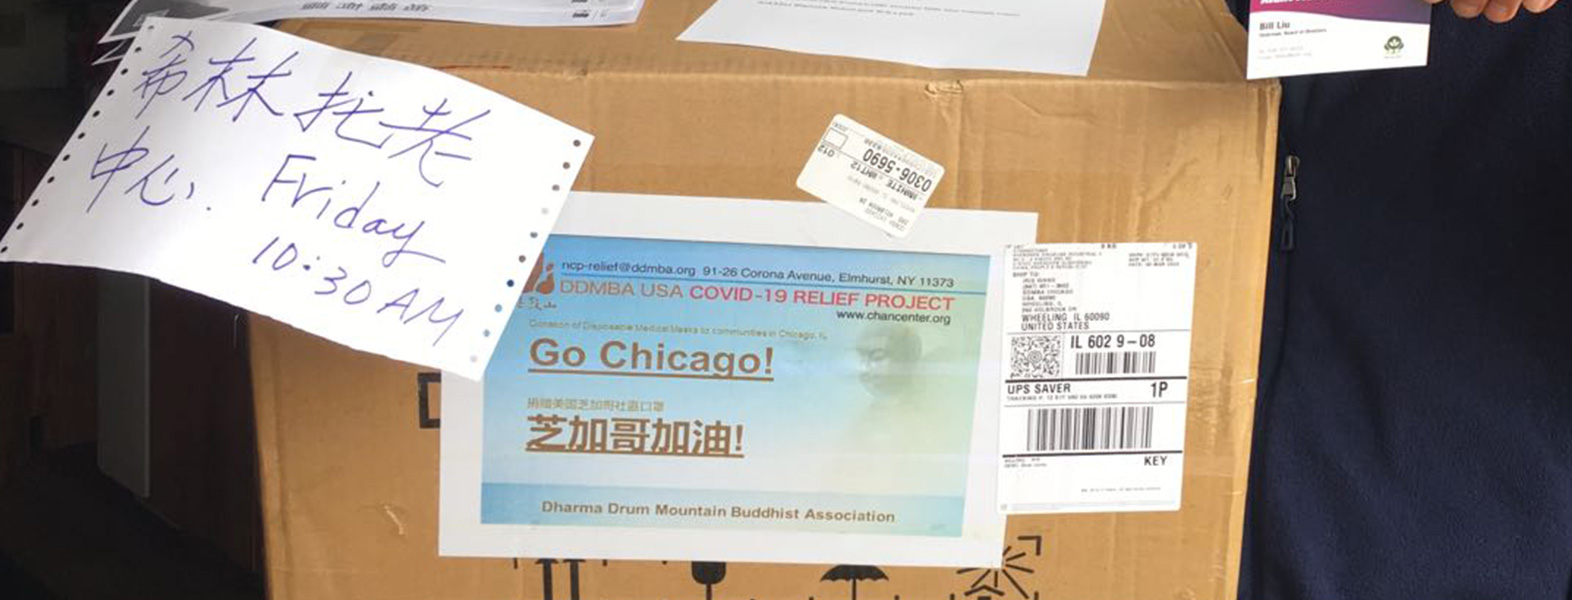 DDMBA USA COVID-19 Relief Project Delivery Report - Chicago